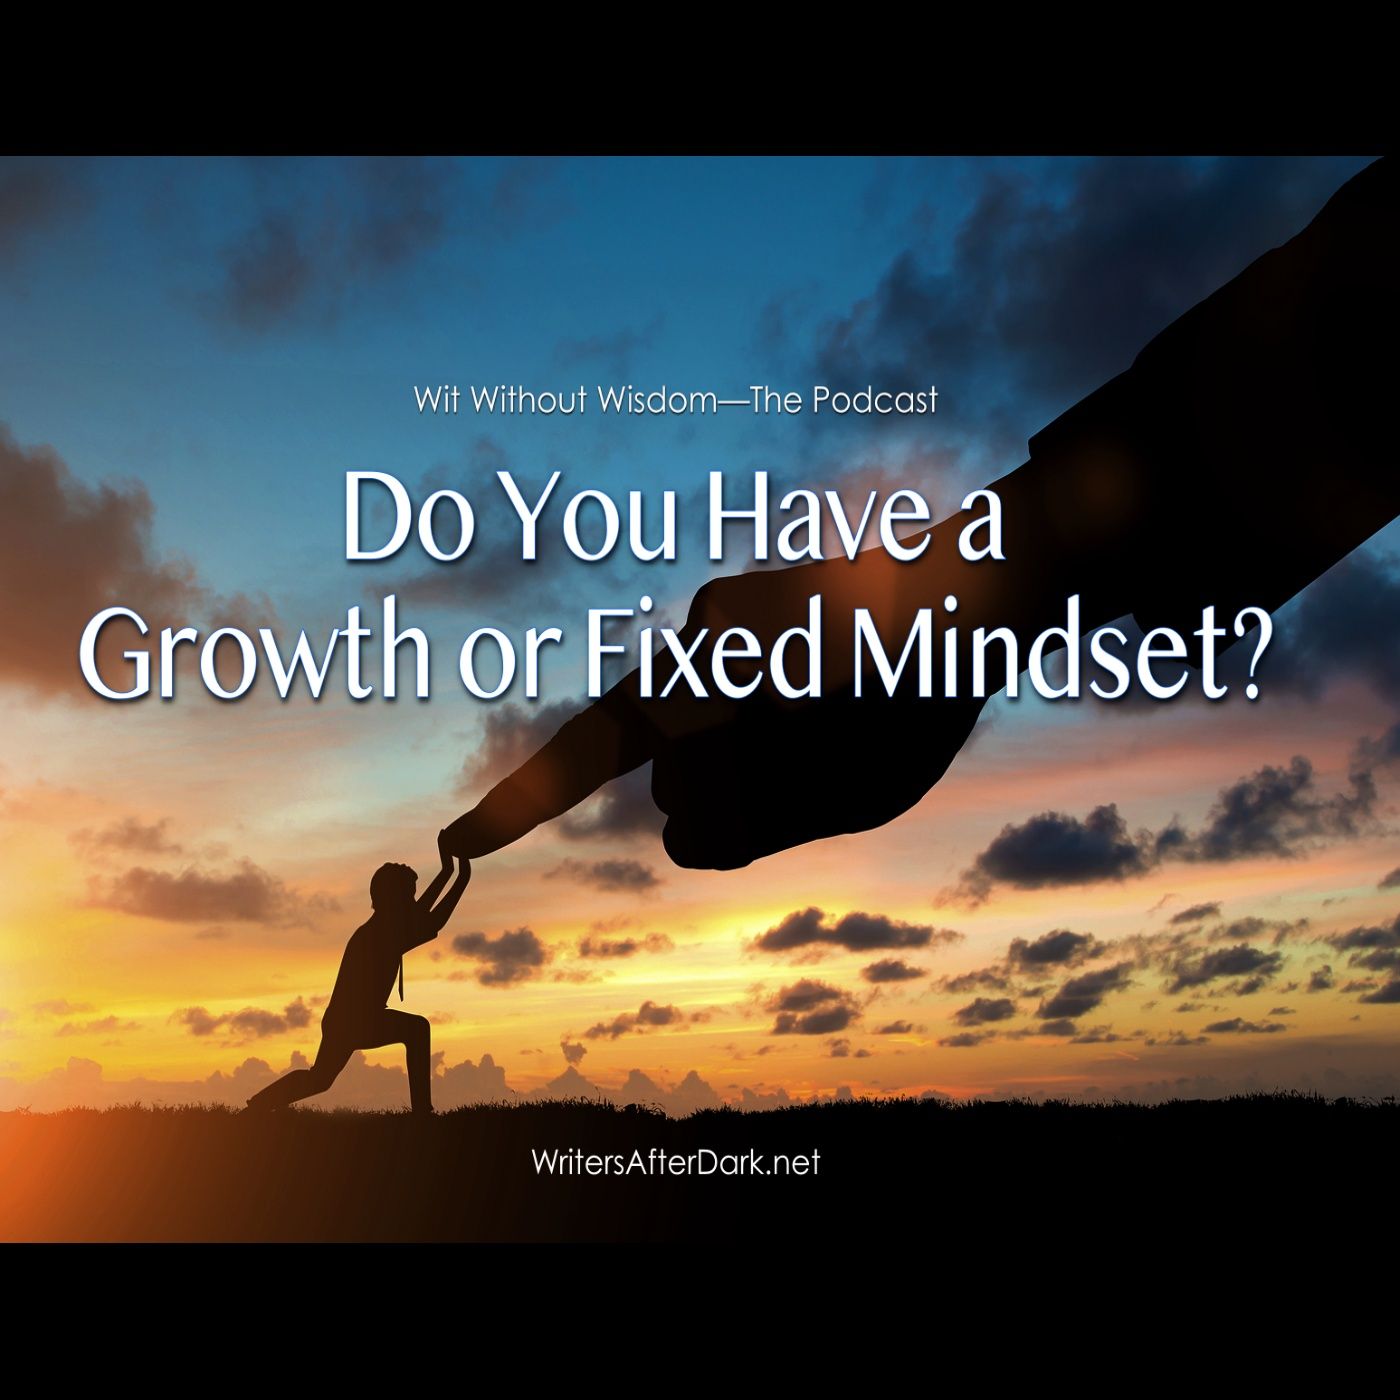 Do You Have a Growth or Fixed Mindset?